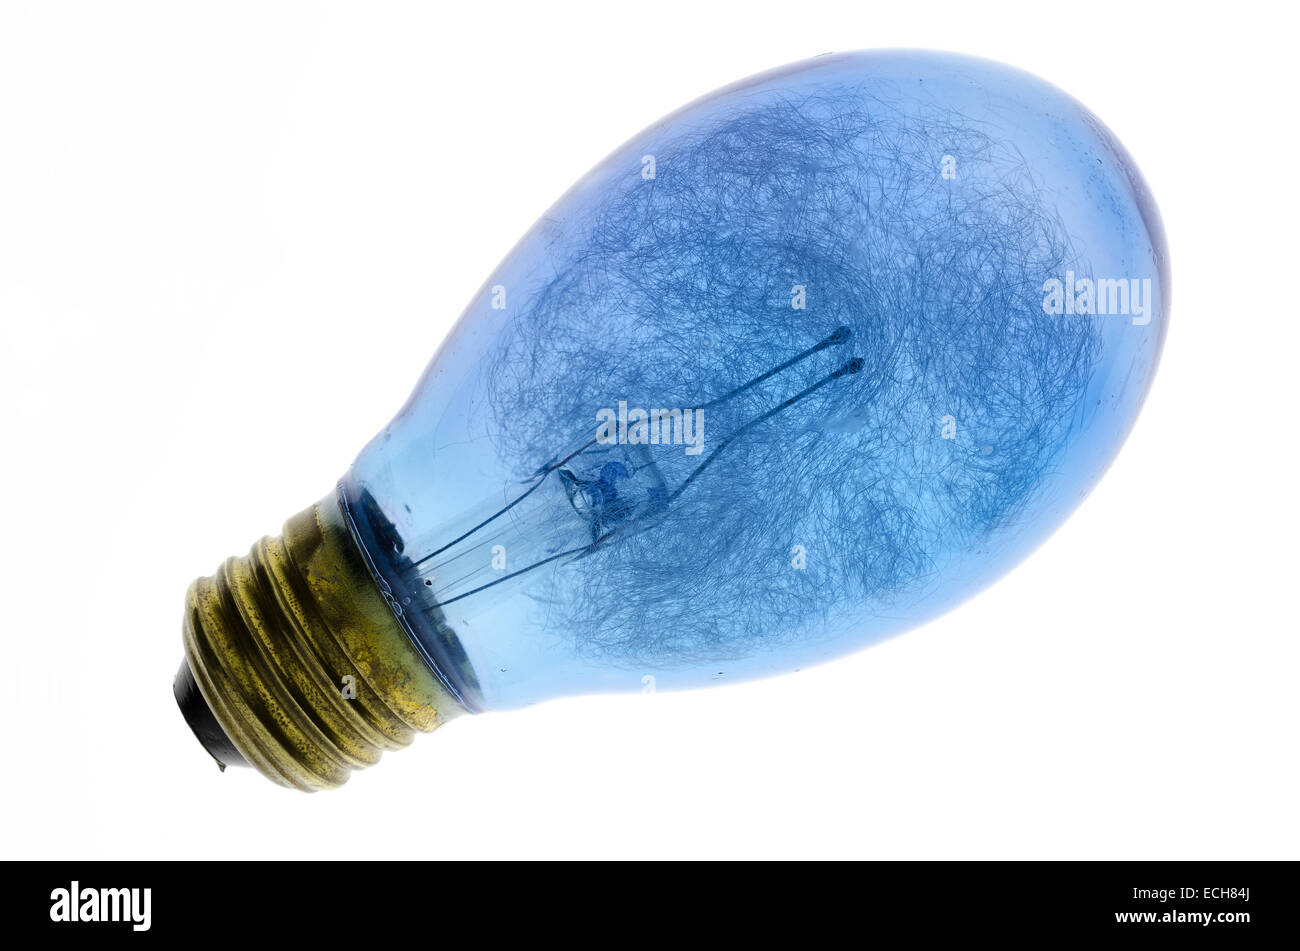 When Lighting a Lightbulb, Use a Thicker Wire